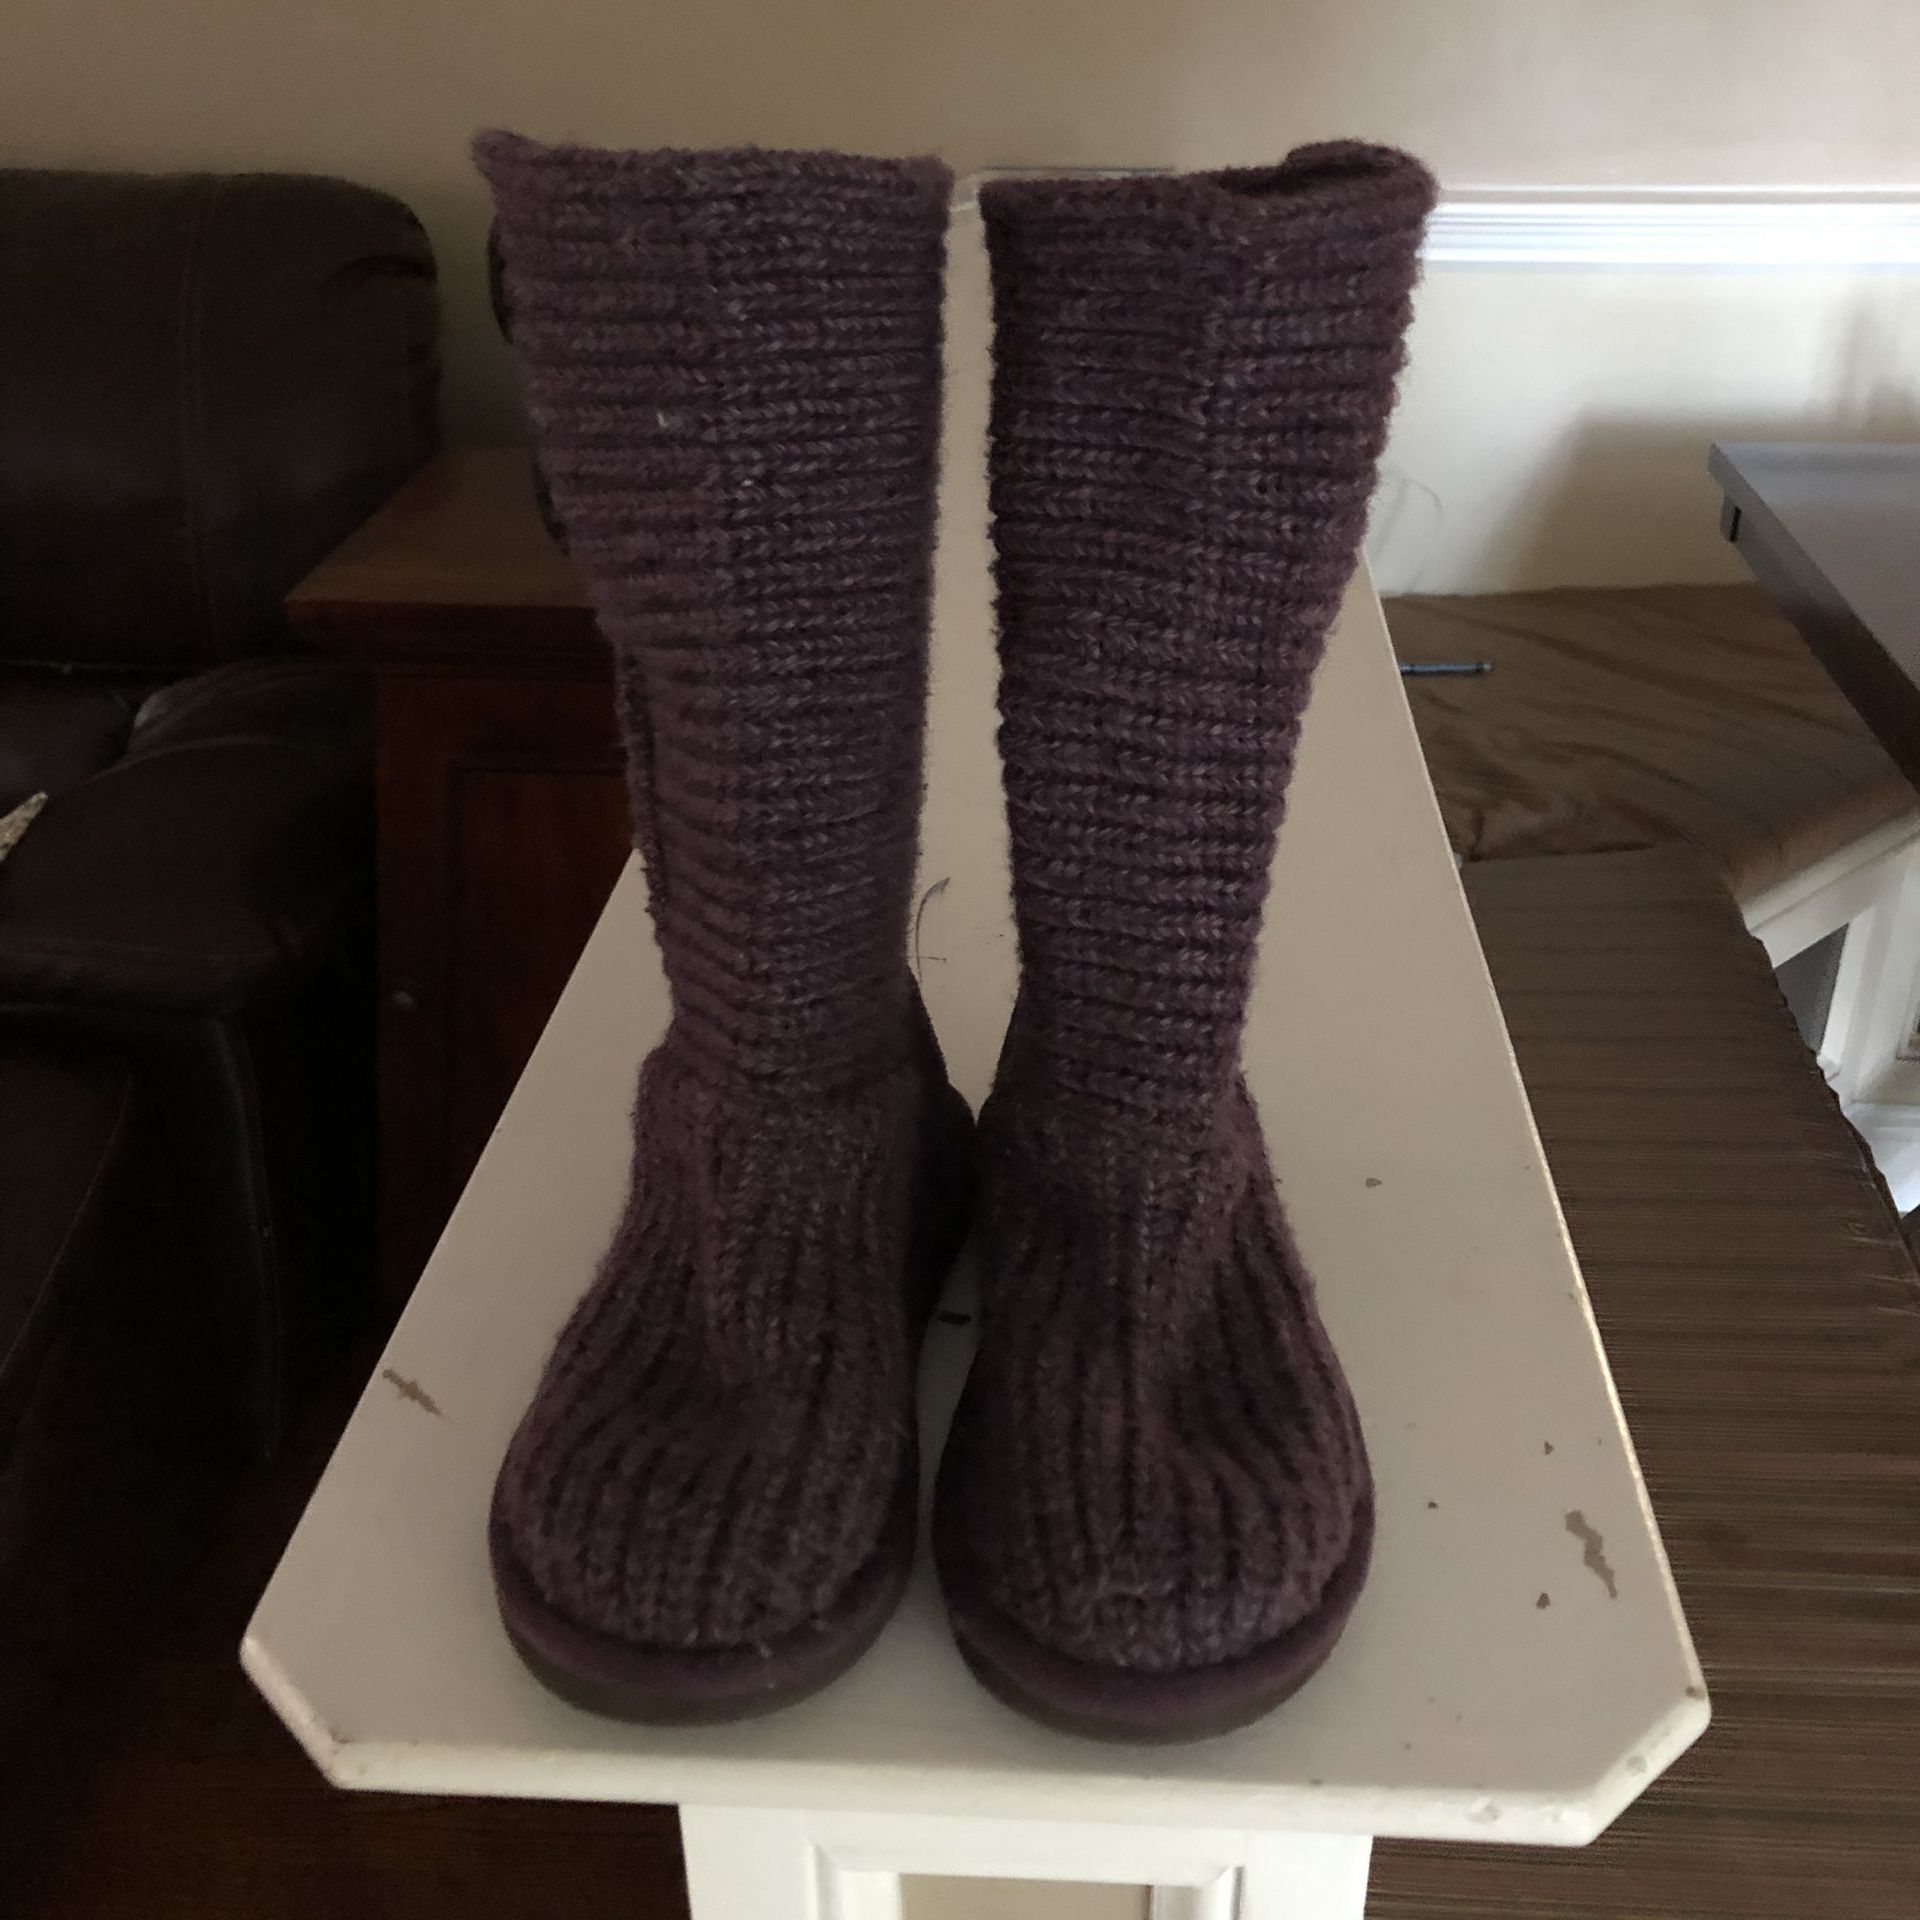 Uggs knit boots